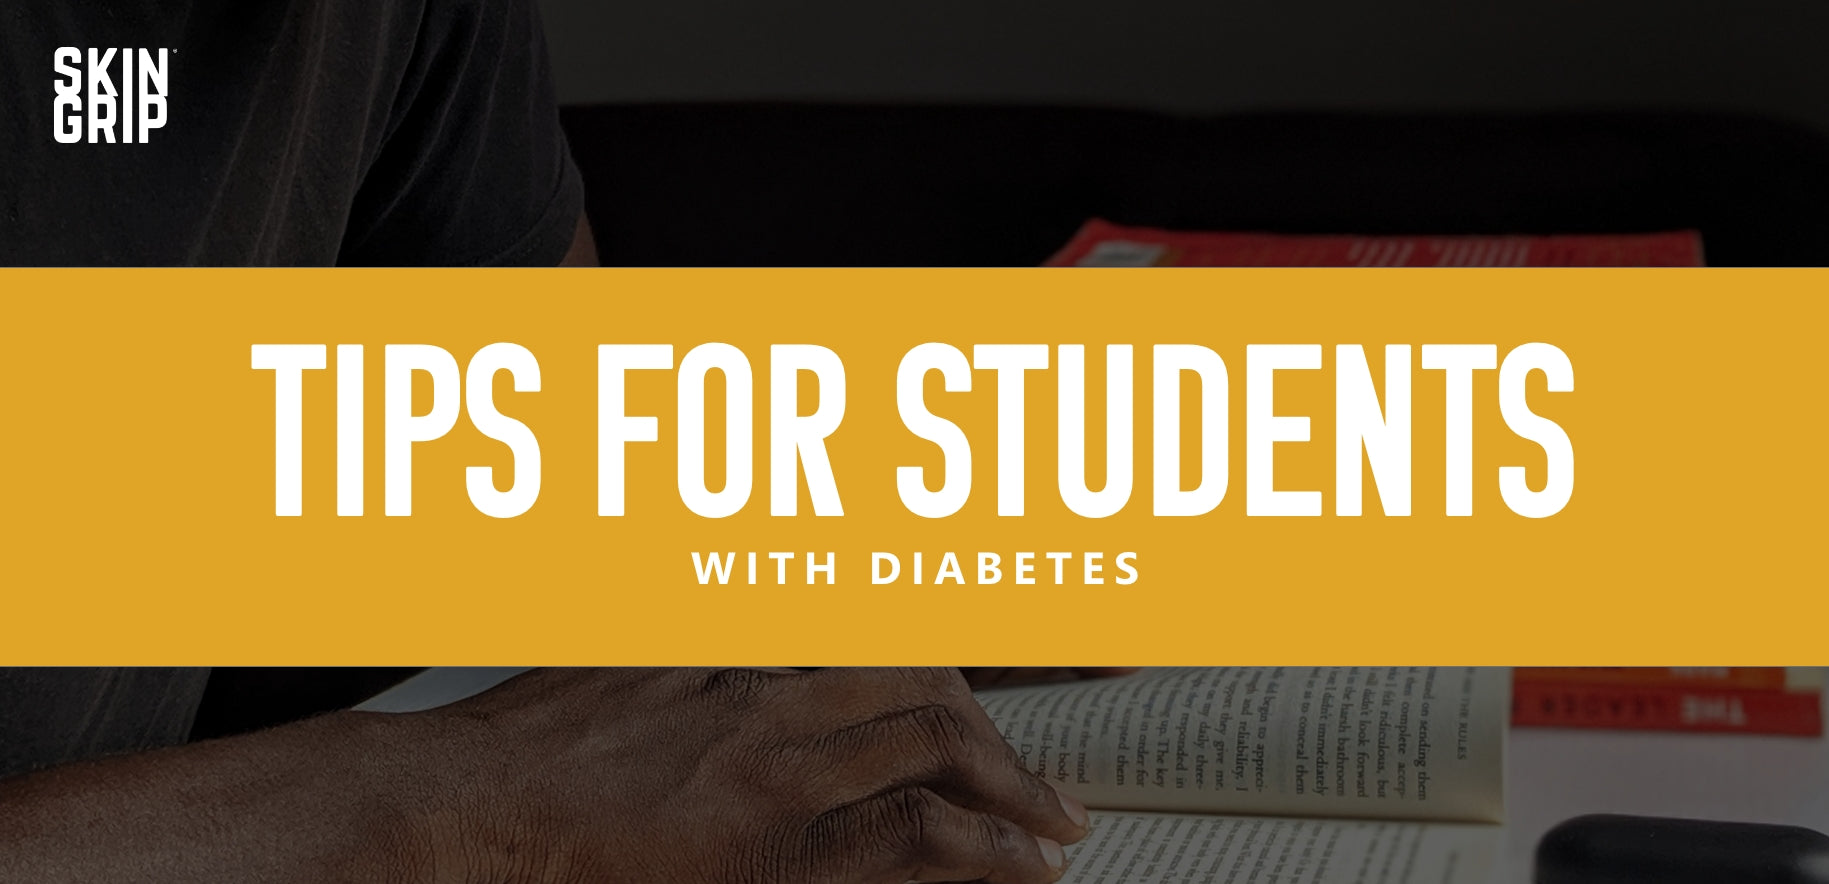 College with T1D: Navigating Stress of Diabetes During College